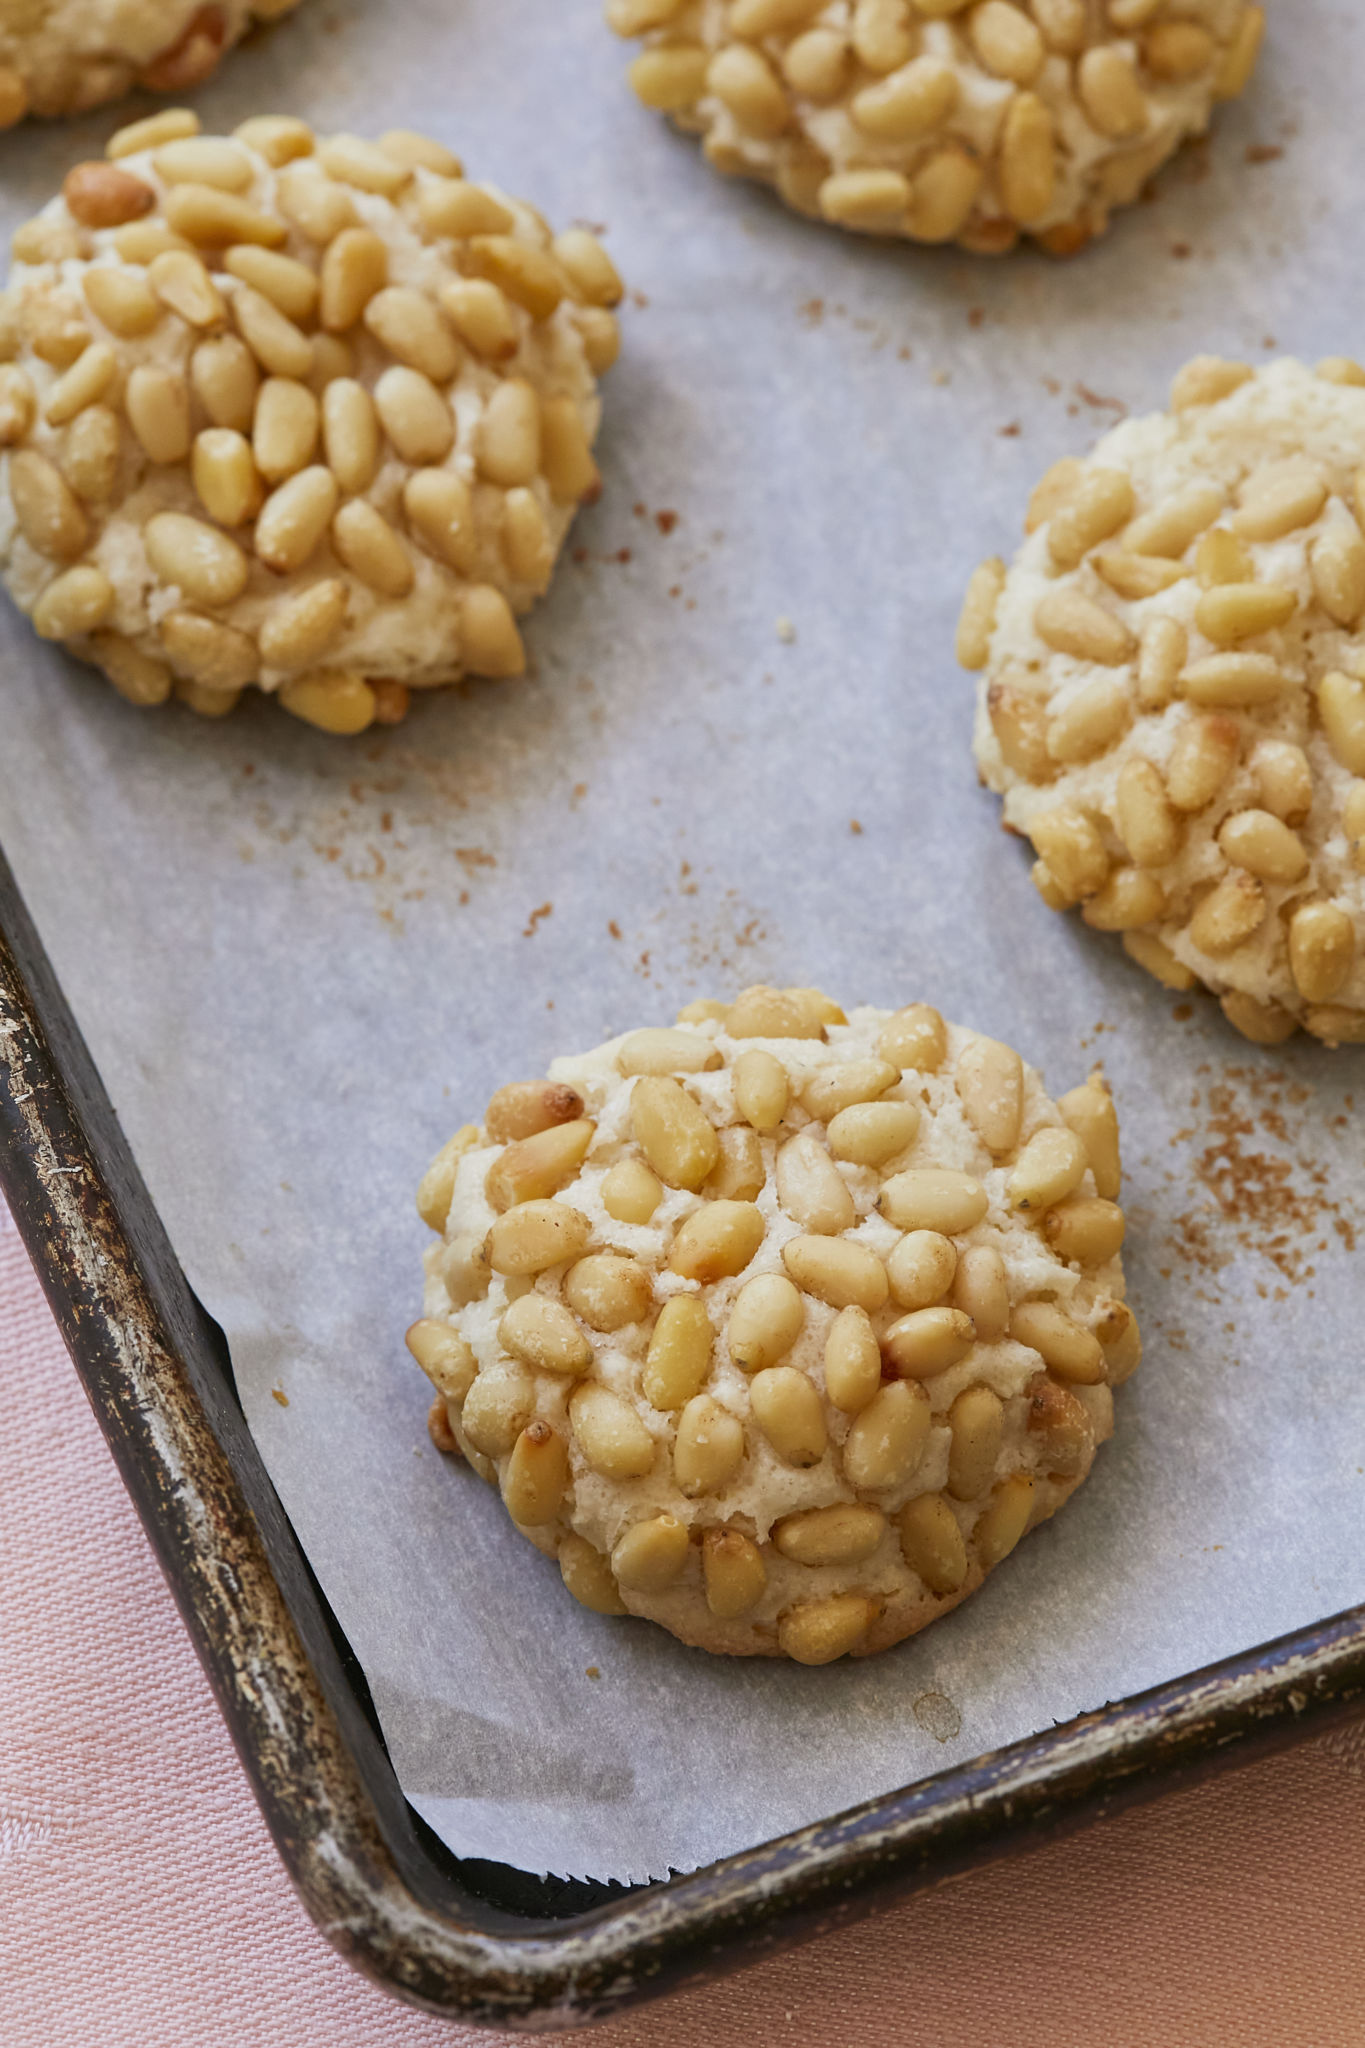 A close-up image of Italian Pignoli Cookies. The almond cookies are covered in toasted pine nuts.